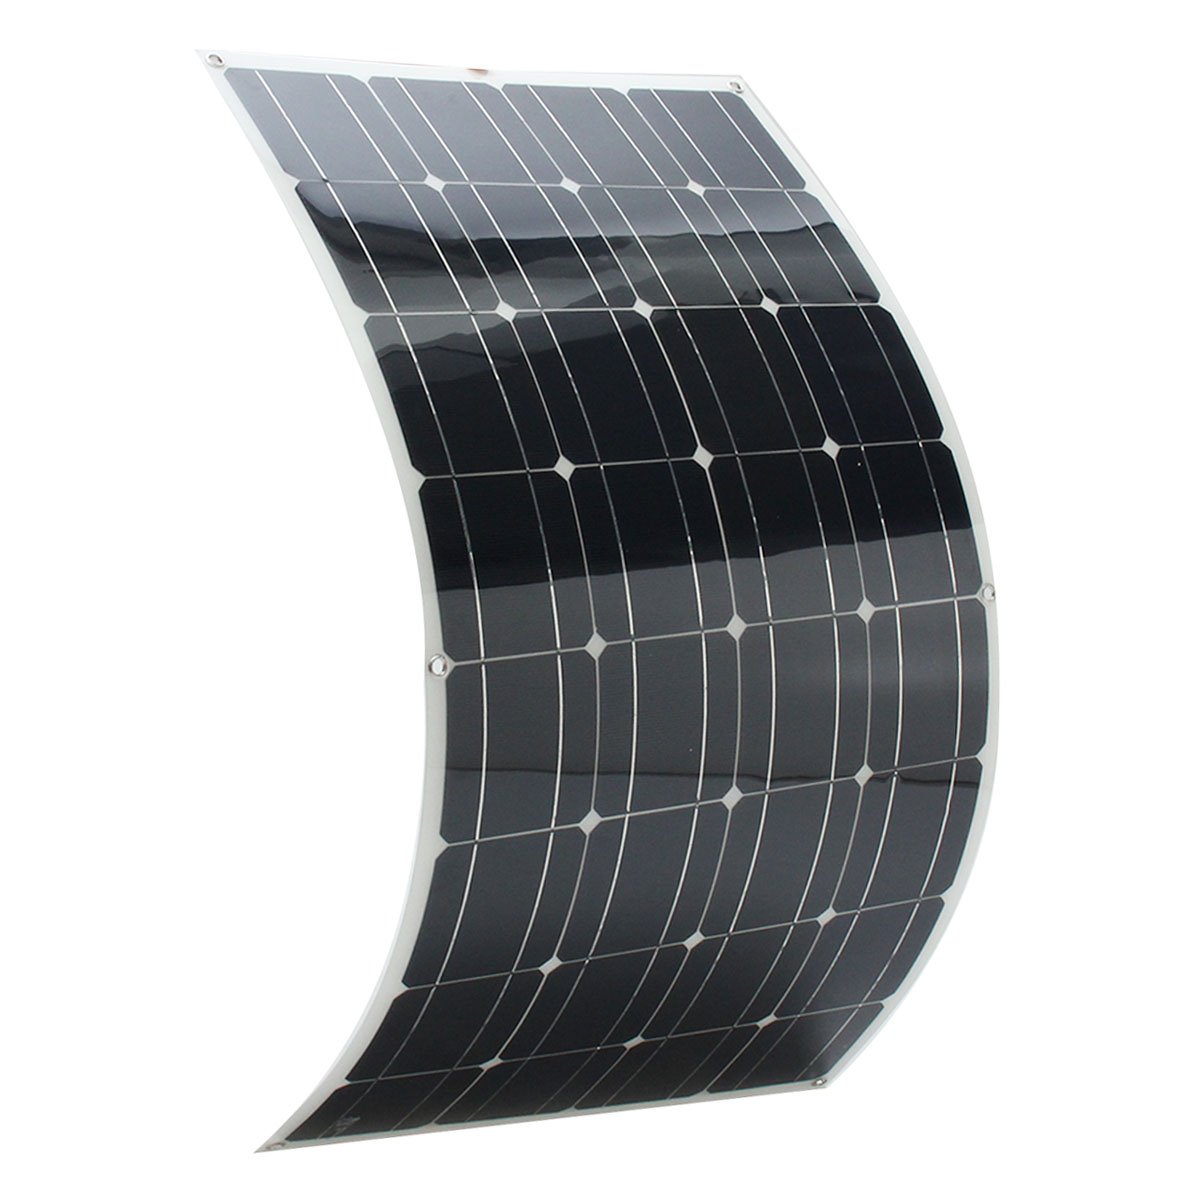 Elfeland® SP-38 18V 100W 1050x540x2.5mm Flexible Solar Panel With 1.5m Cable 2